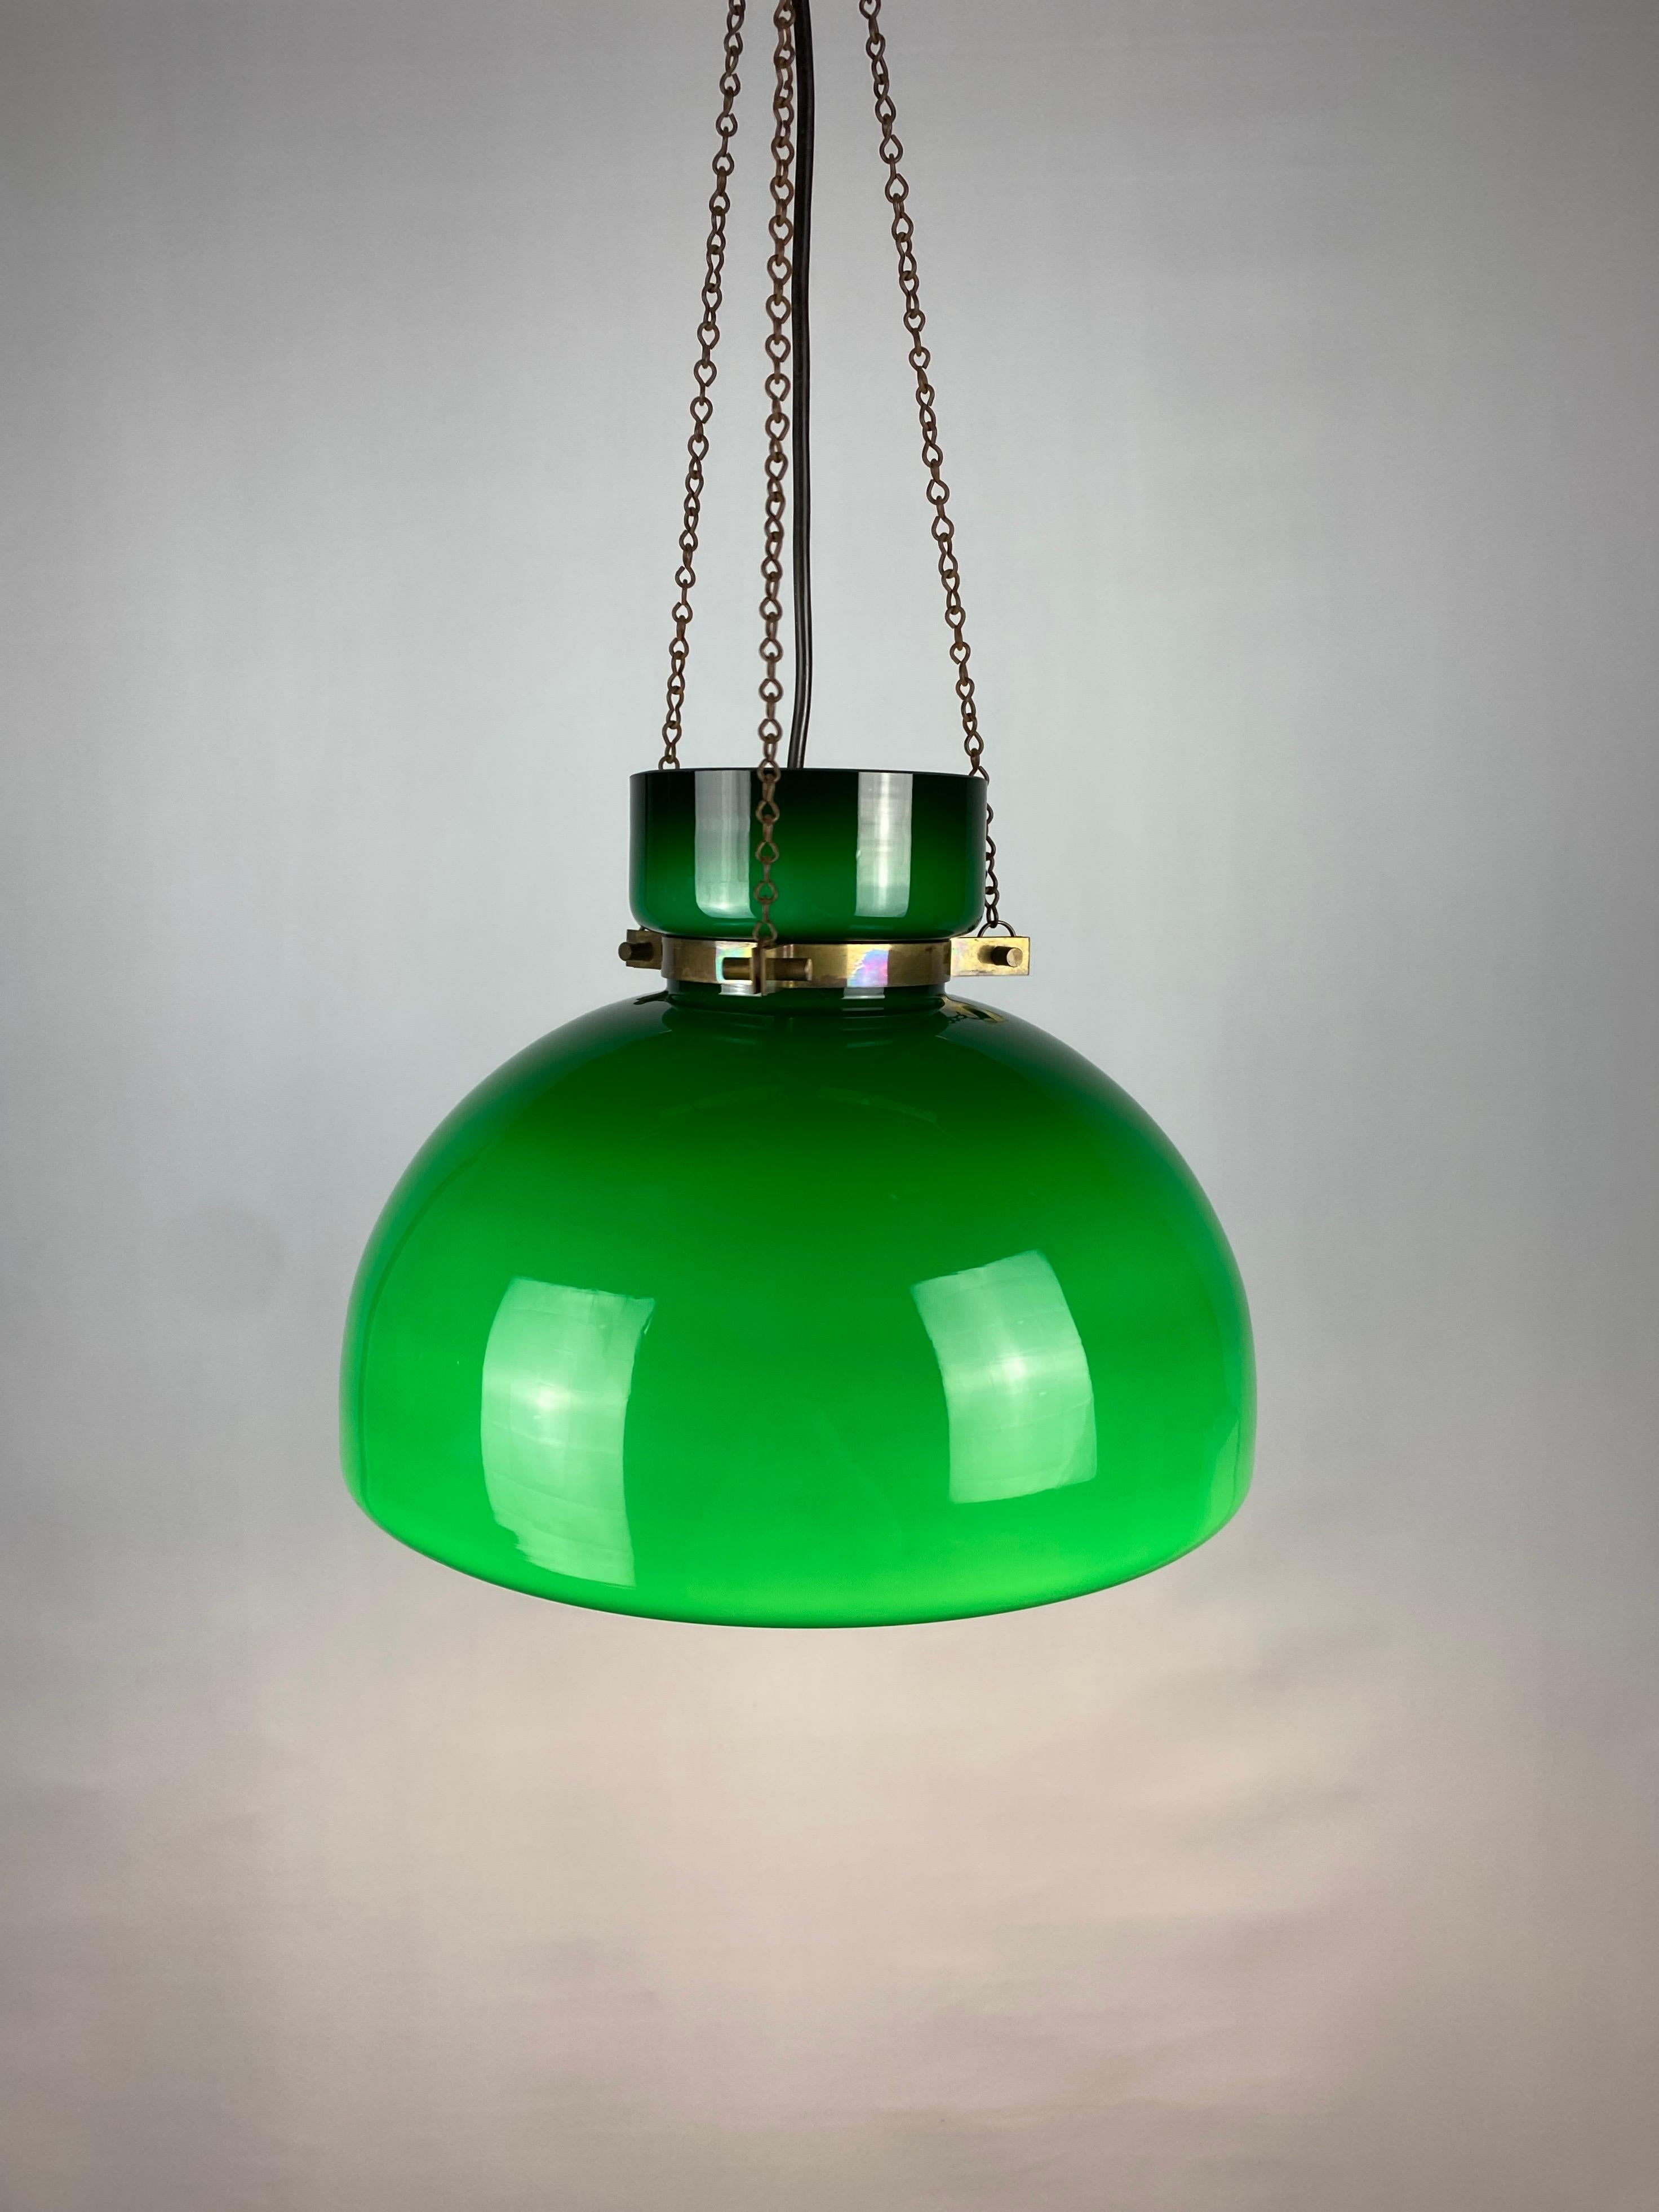 Beautiful dark green opaline glass pendant light by Glashütte Limburg from the 1970's designed by Herbert Proft. 

The green glass shade is held in place by a brass ring which leads to three chains that are mounted at the top to three hooks. The